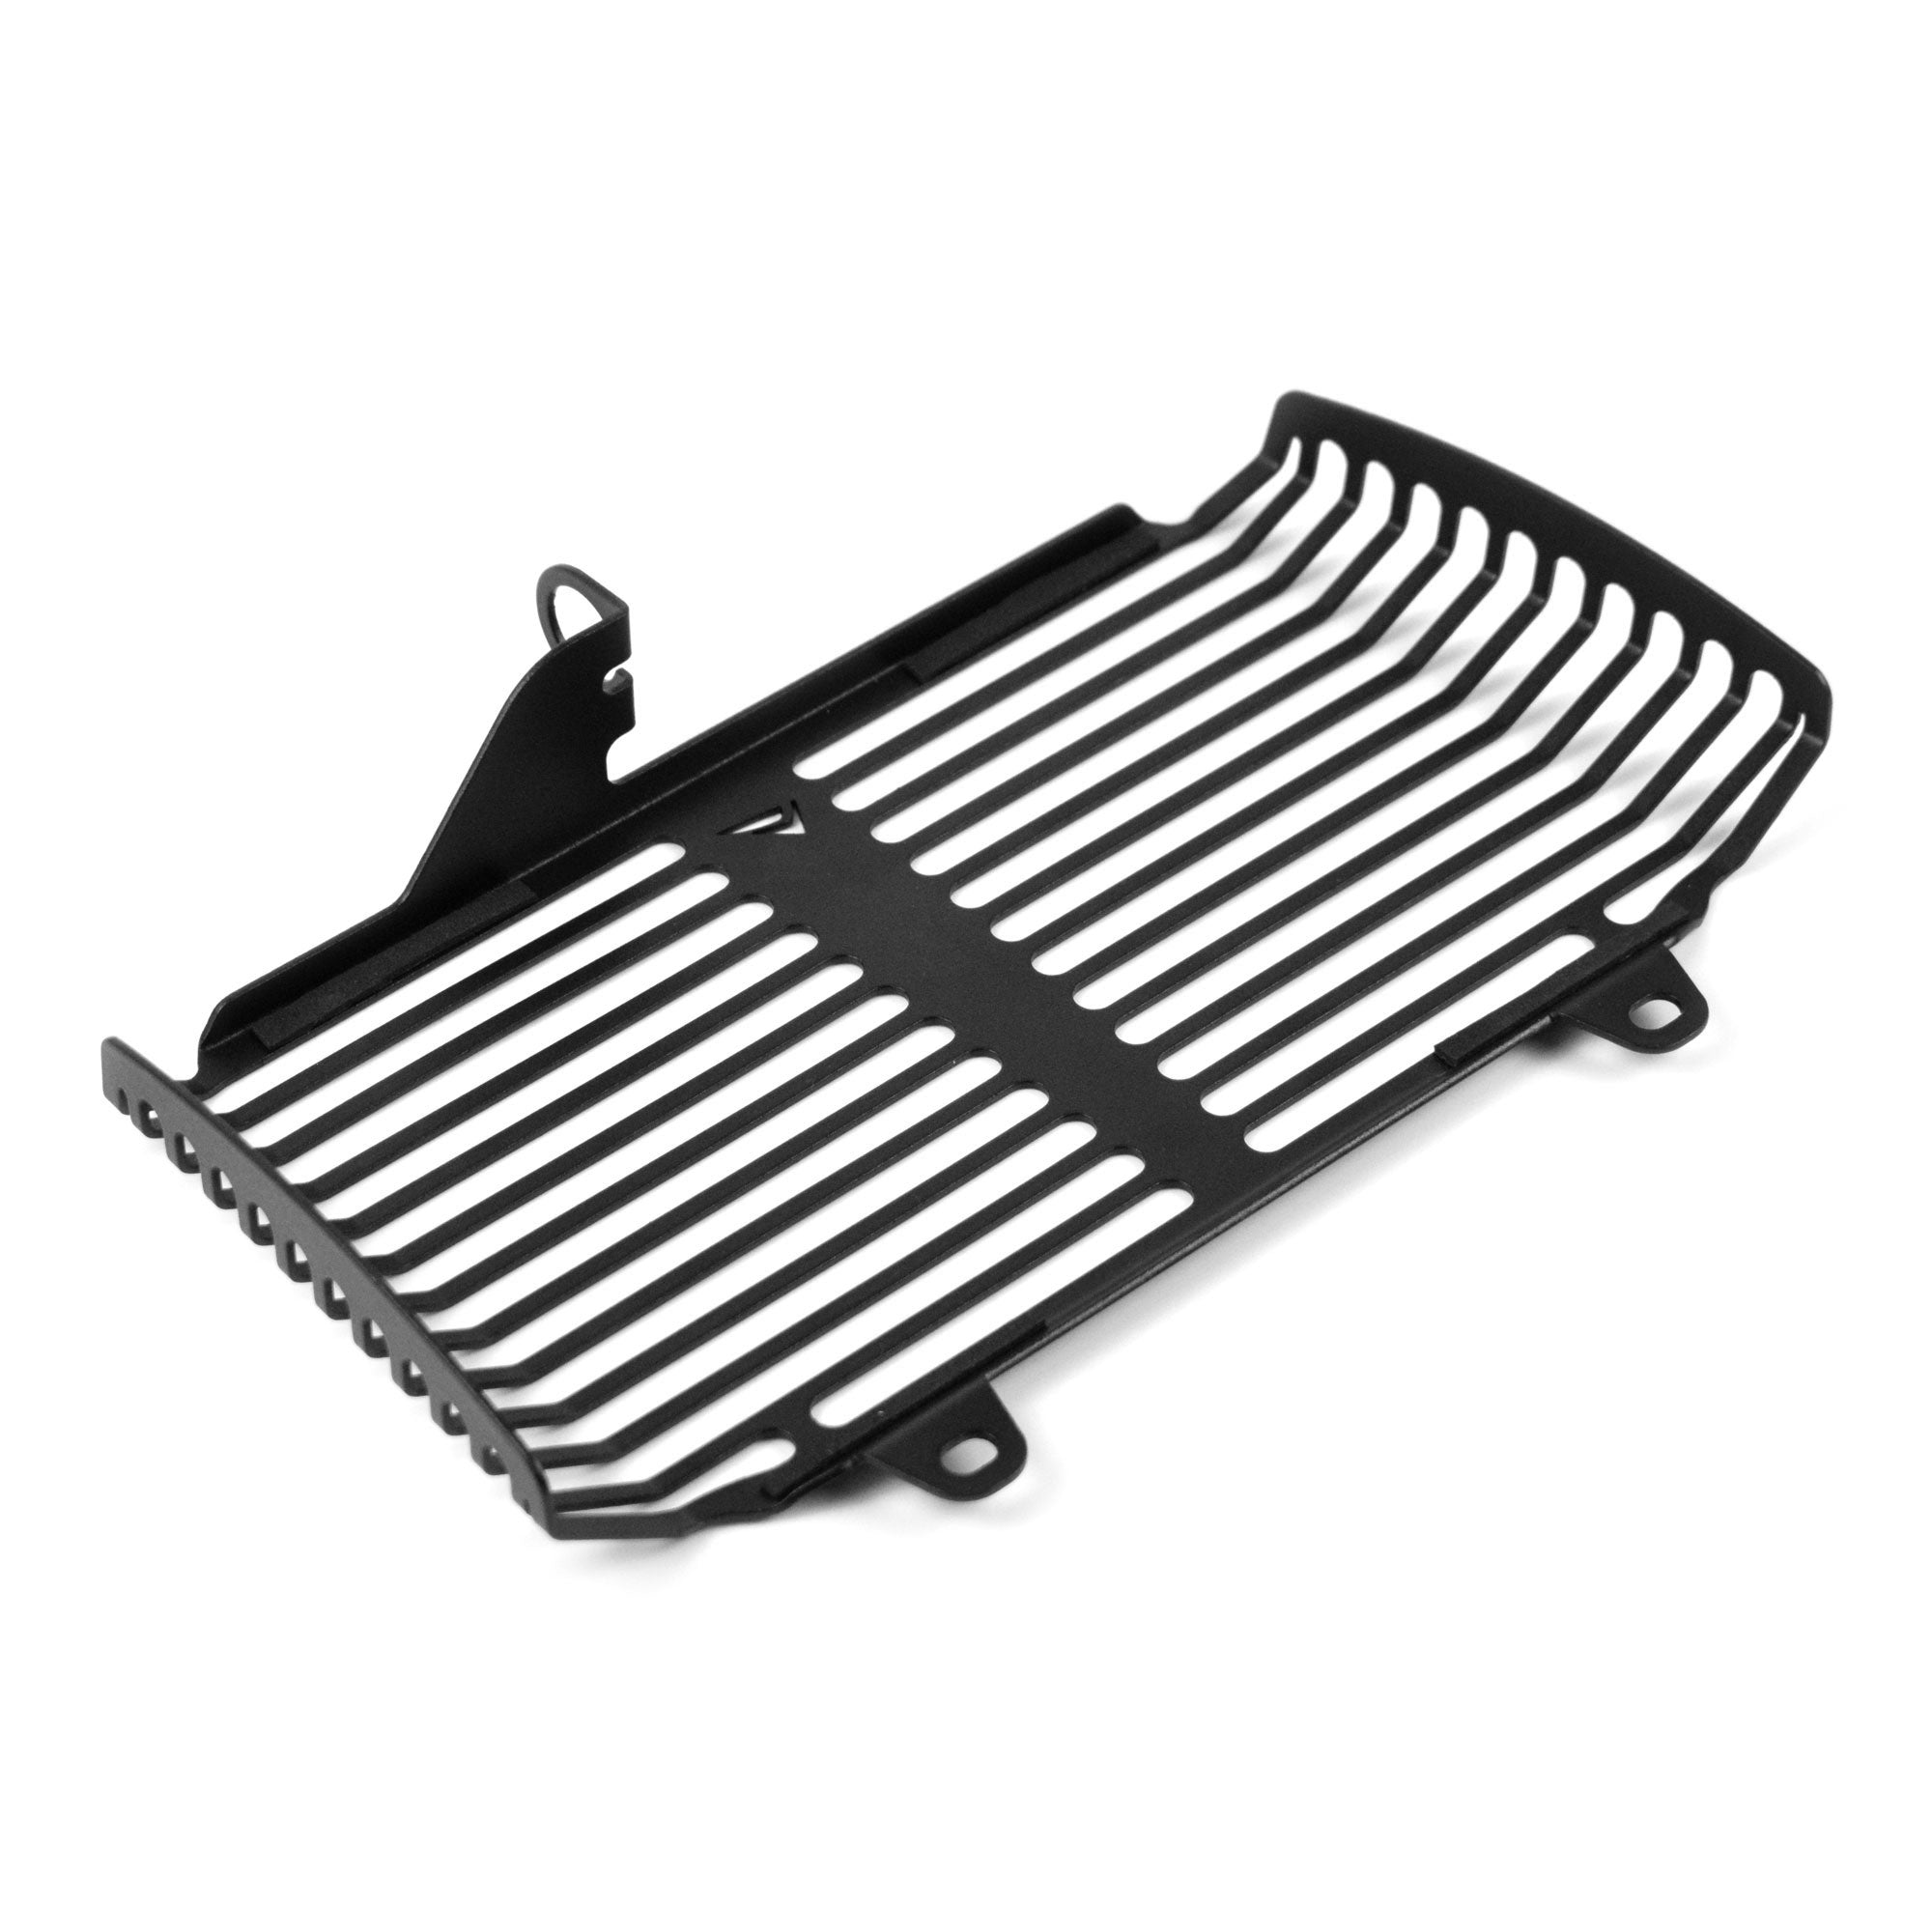 Pyramid Oil Cooler Guard | Matte Black | Yamaha MT-10 SP 2016>Current-522096M-Radiator Guards-Pyramid Motorcycle Accessories